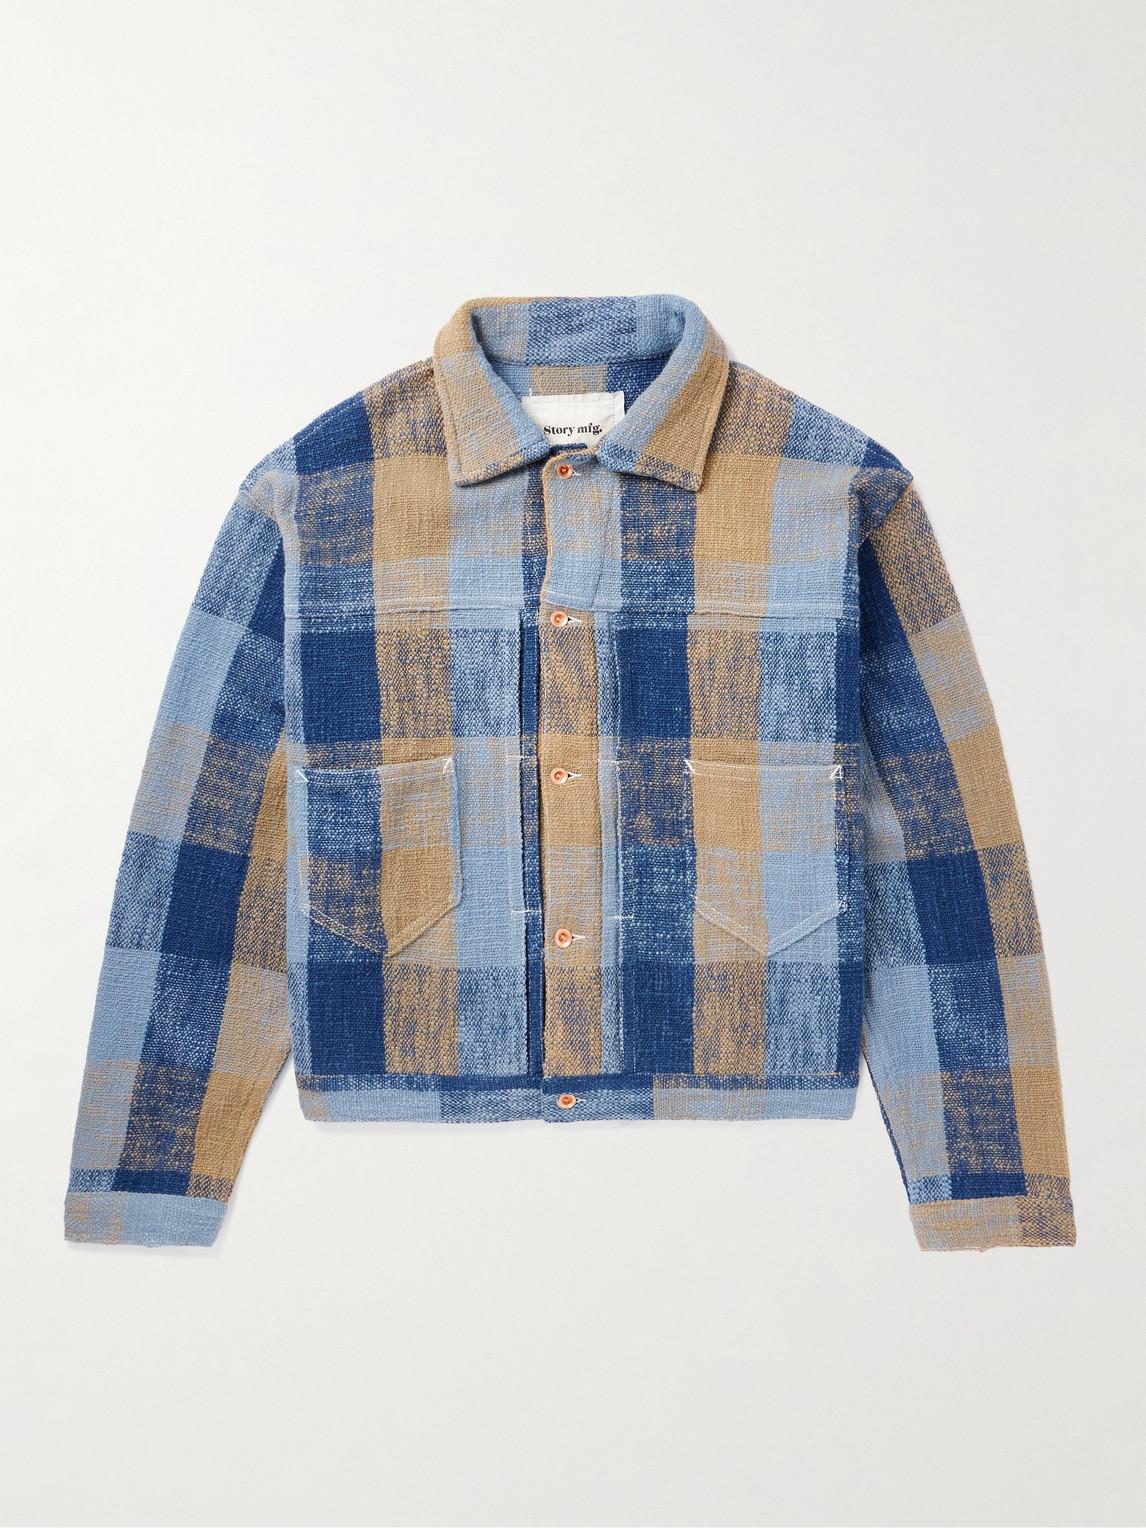 STORY mfg. Sundae Checked Organic Cotton-bouclé Jacket in Blue for